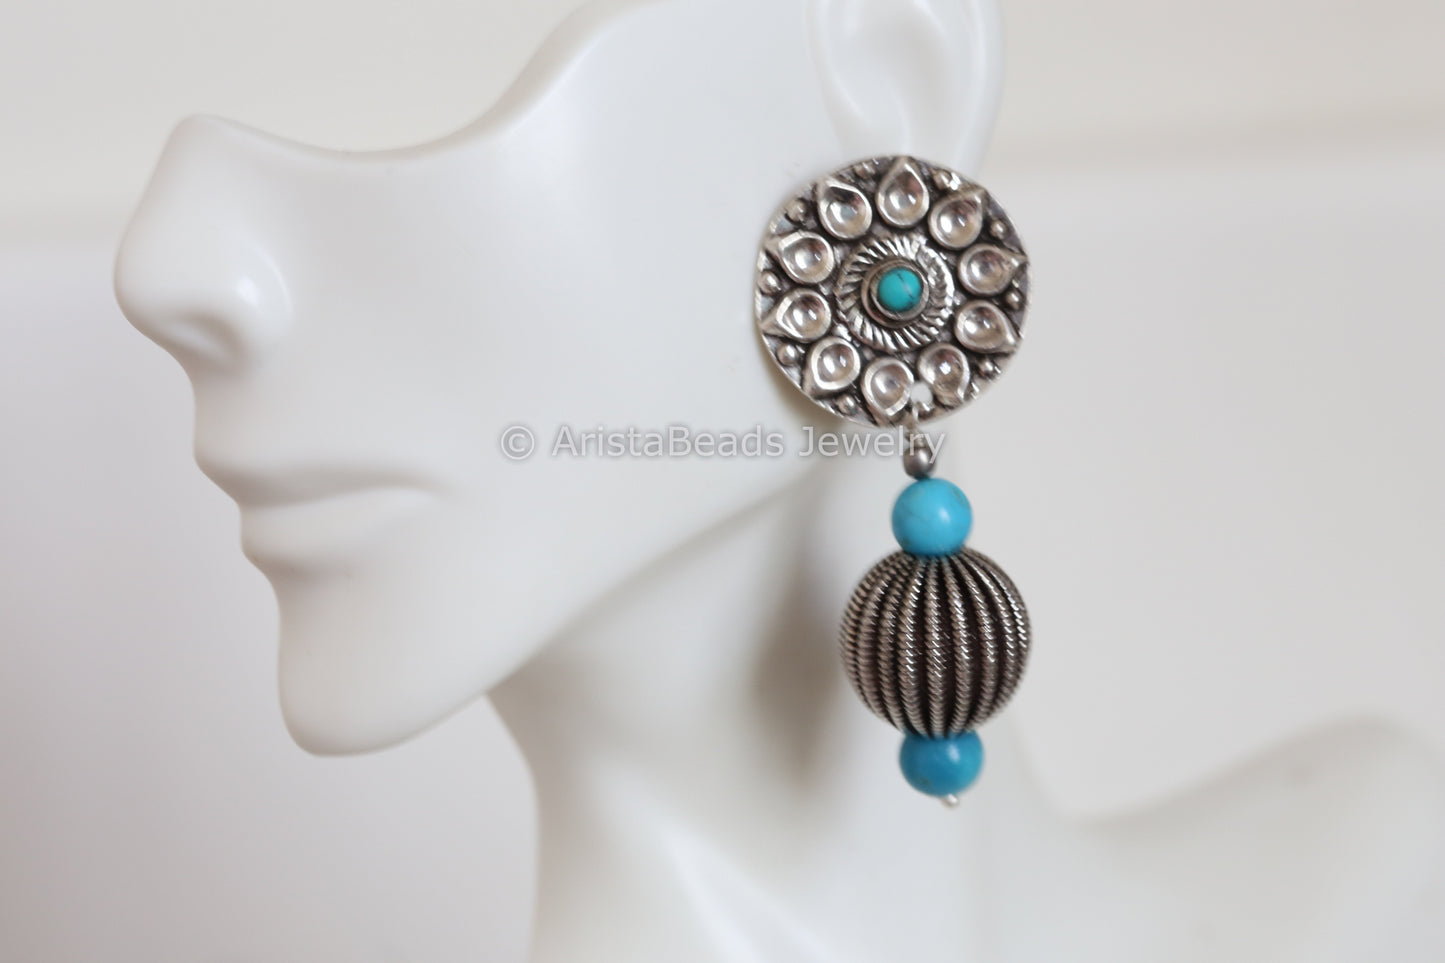 925 Sterling Silver Turquoise Earrings